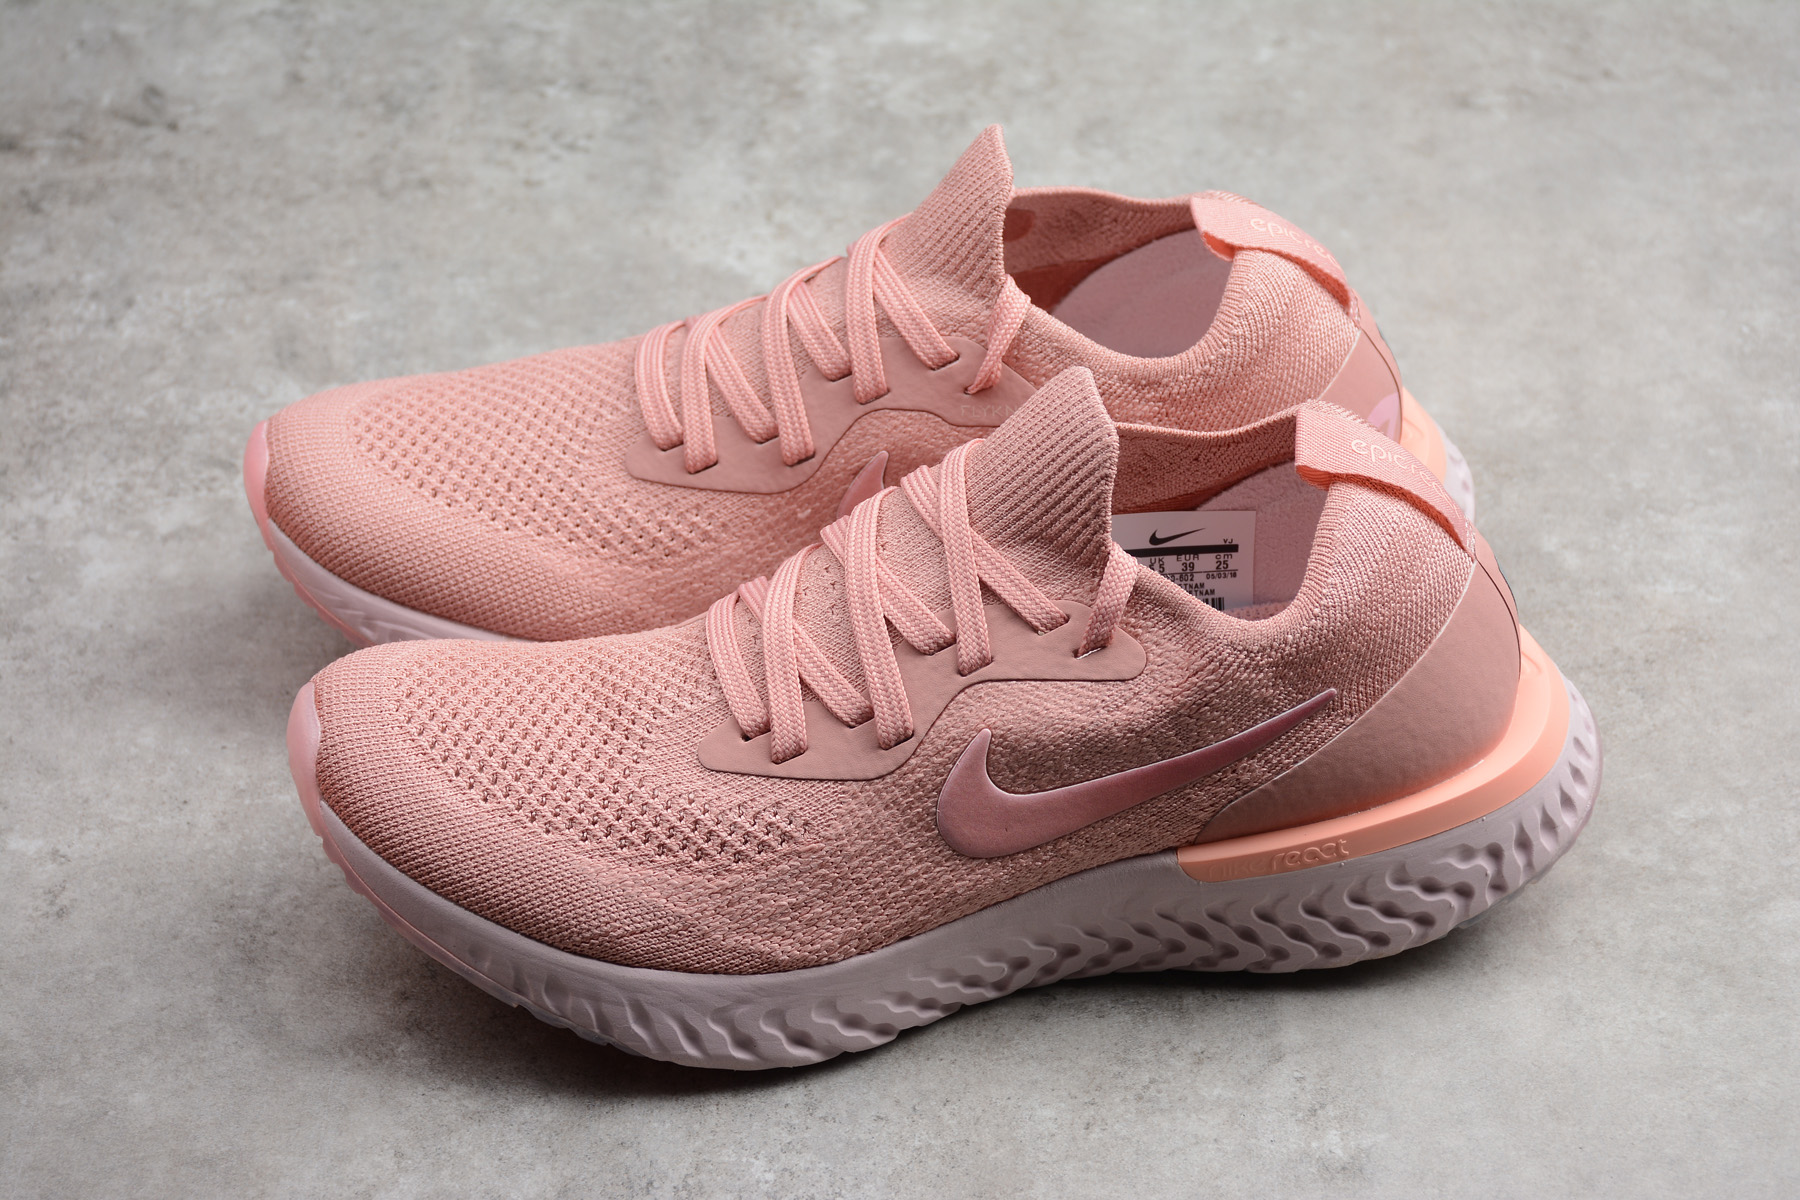 Womens Nike Epic React Flyknit Rust Pink/Pink Tint/Tropical Pink AQ0070-602